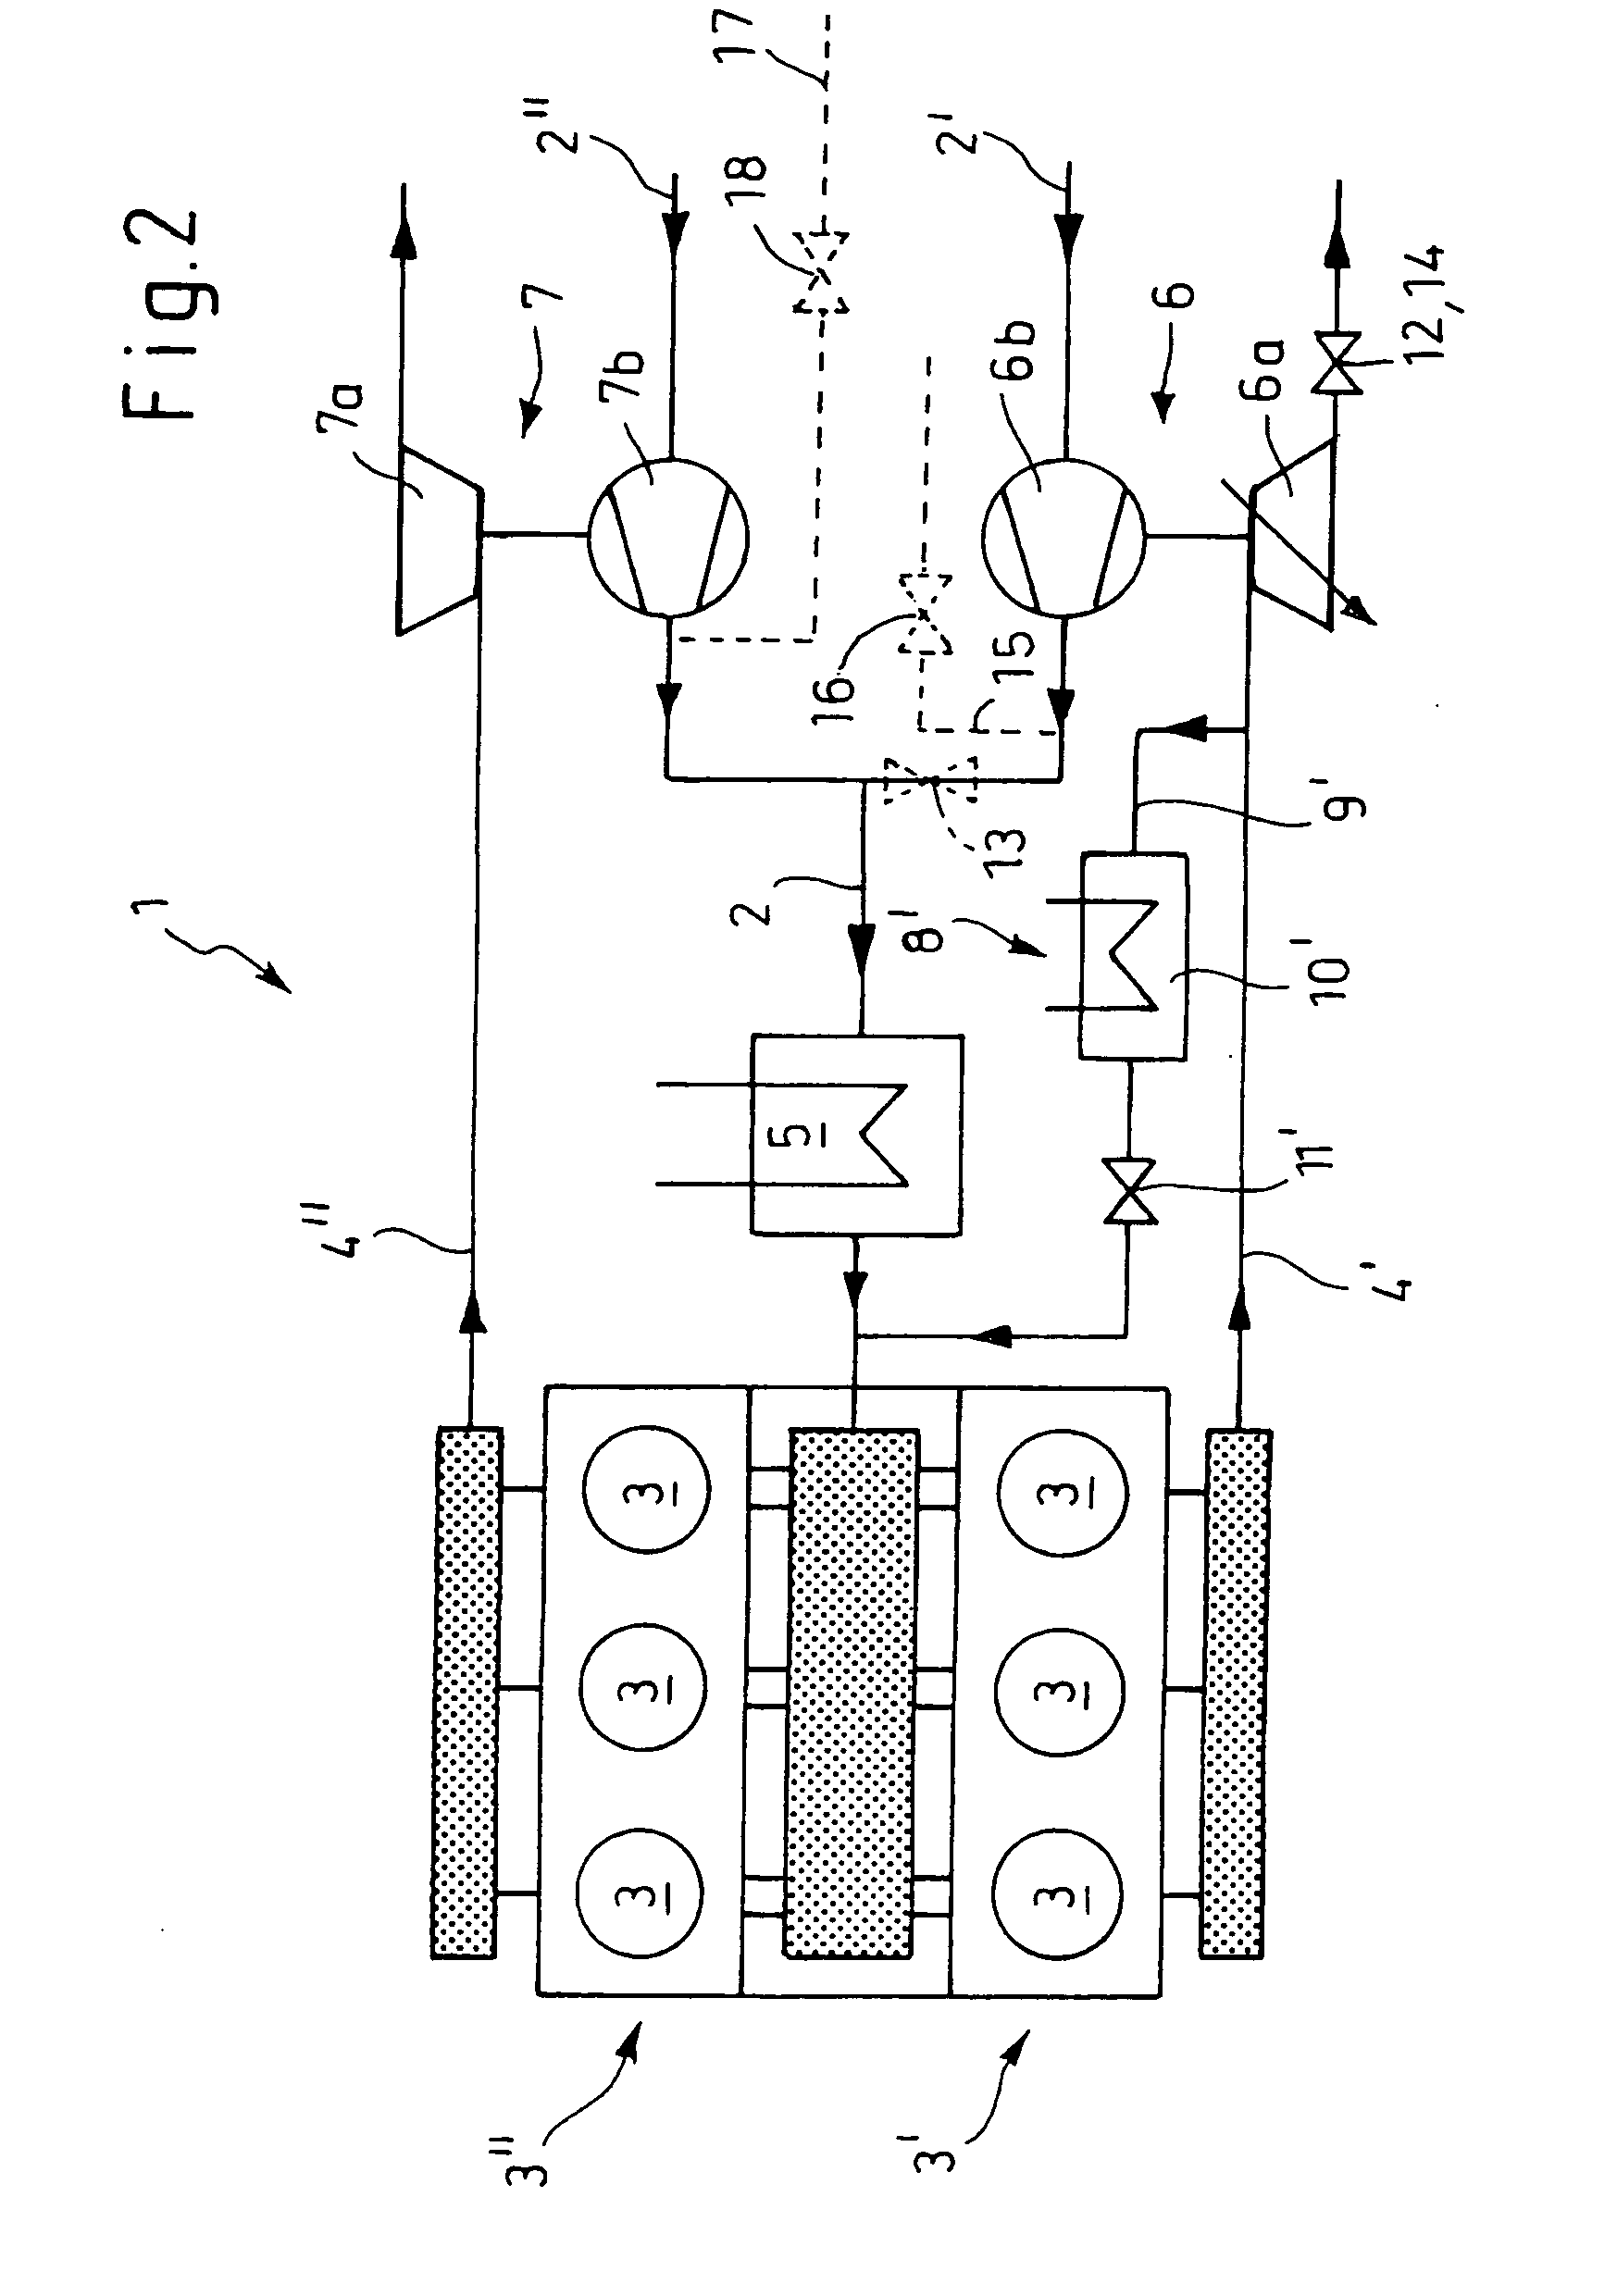 Method and system for influencing the quantity of exhaust gas recirculated in a pressure charged internal combustion engine